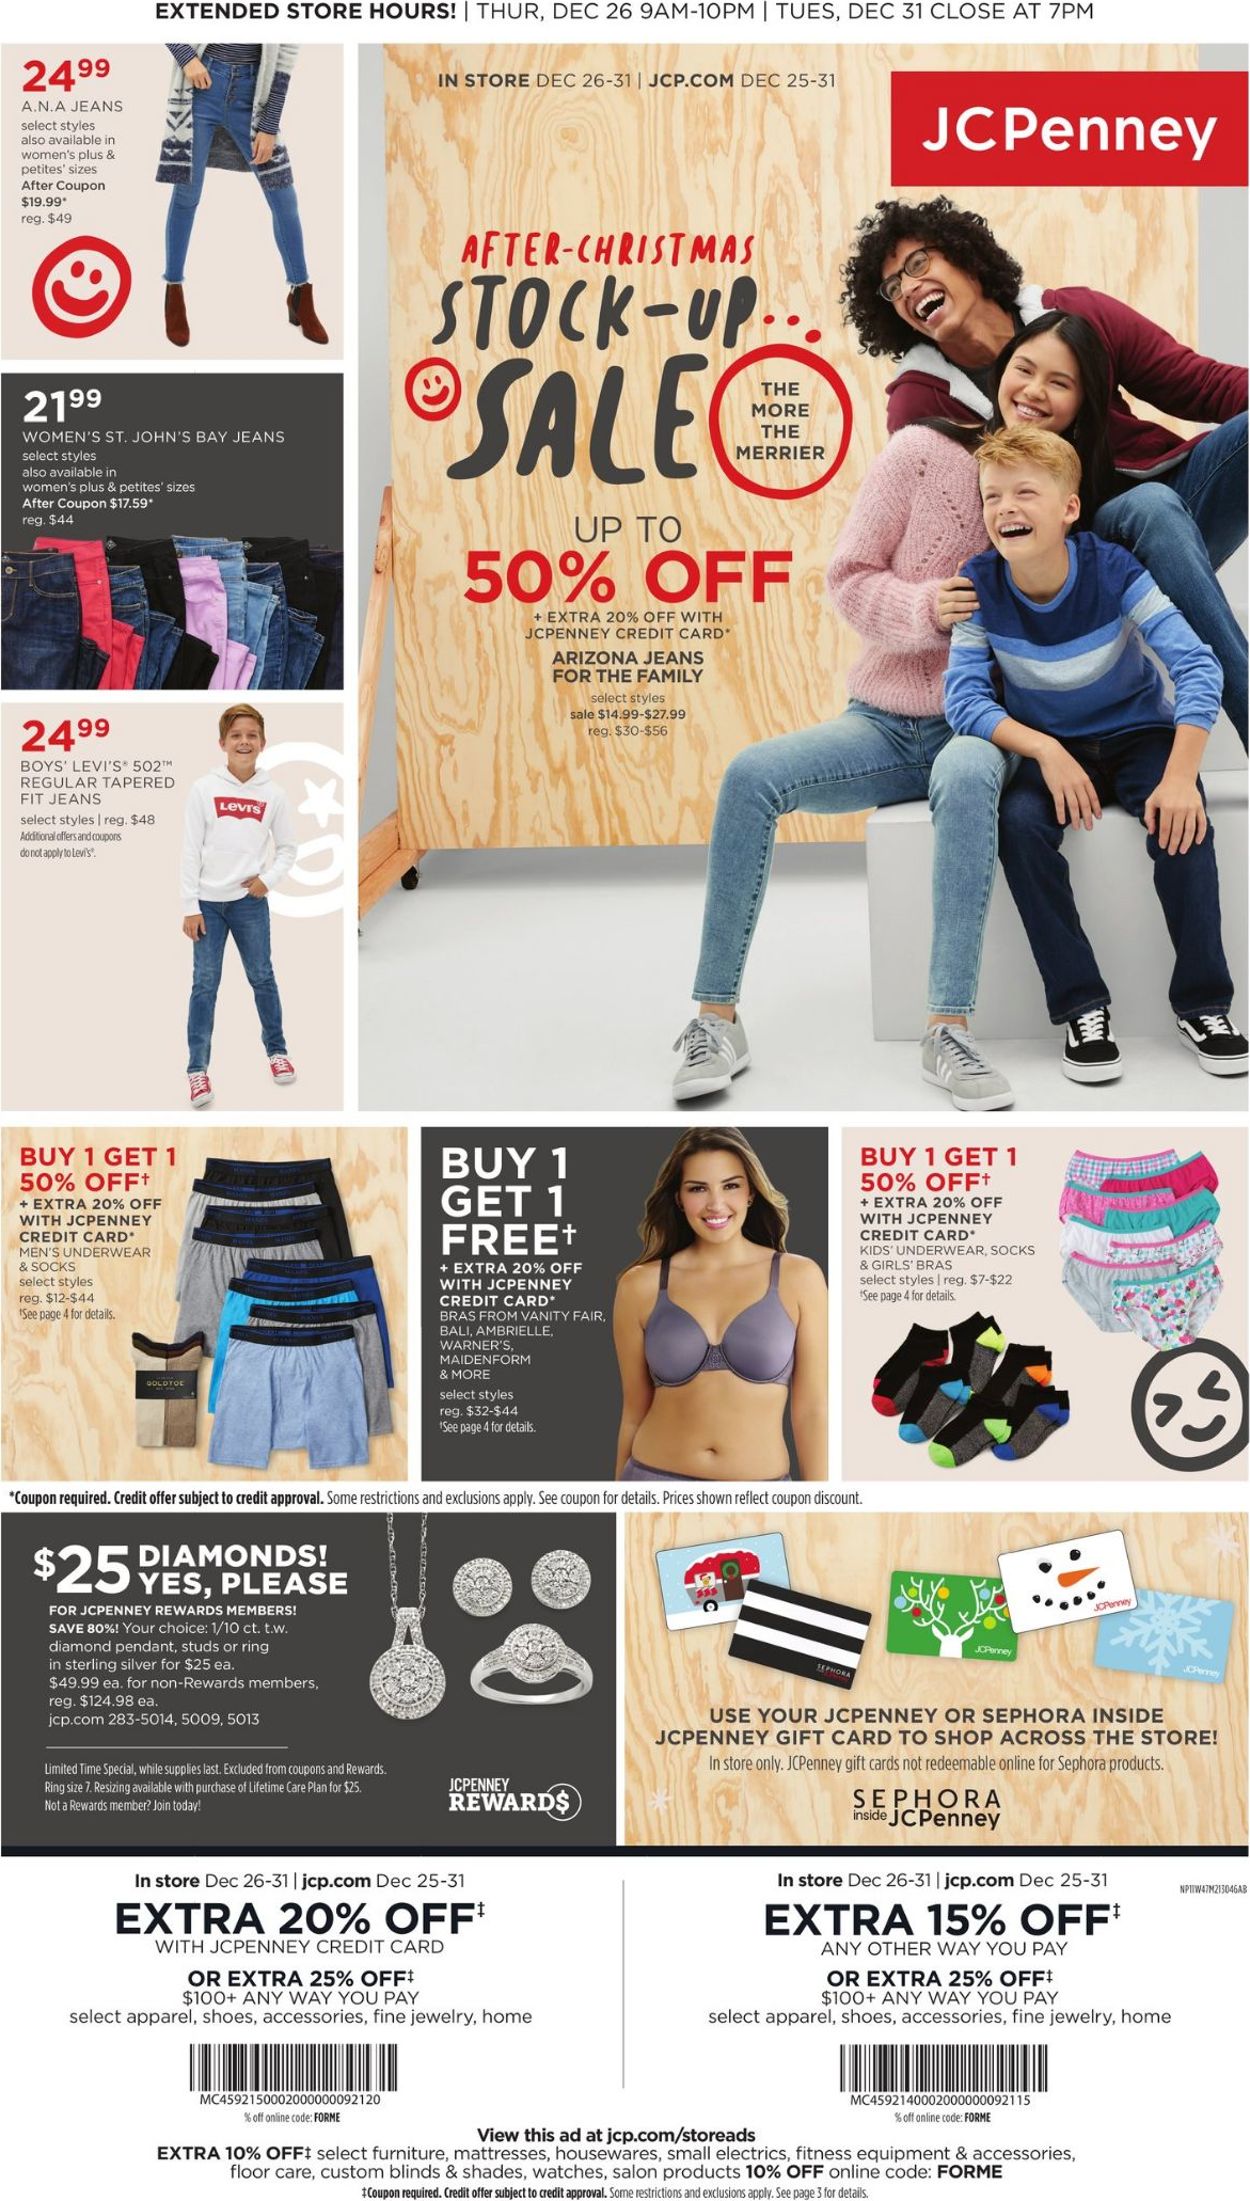 JCPenney - New Year's Ad 2019/2020 Weekly Ad Circular - valid 12/25-12/31/2019